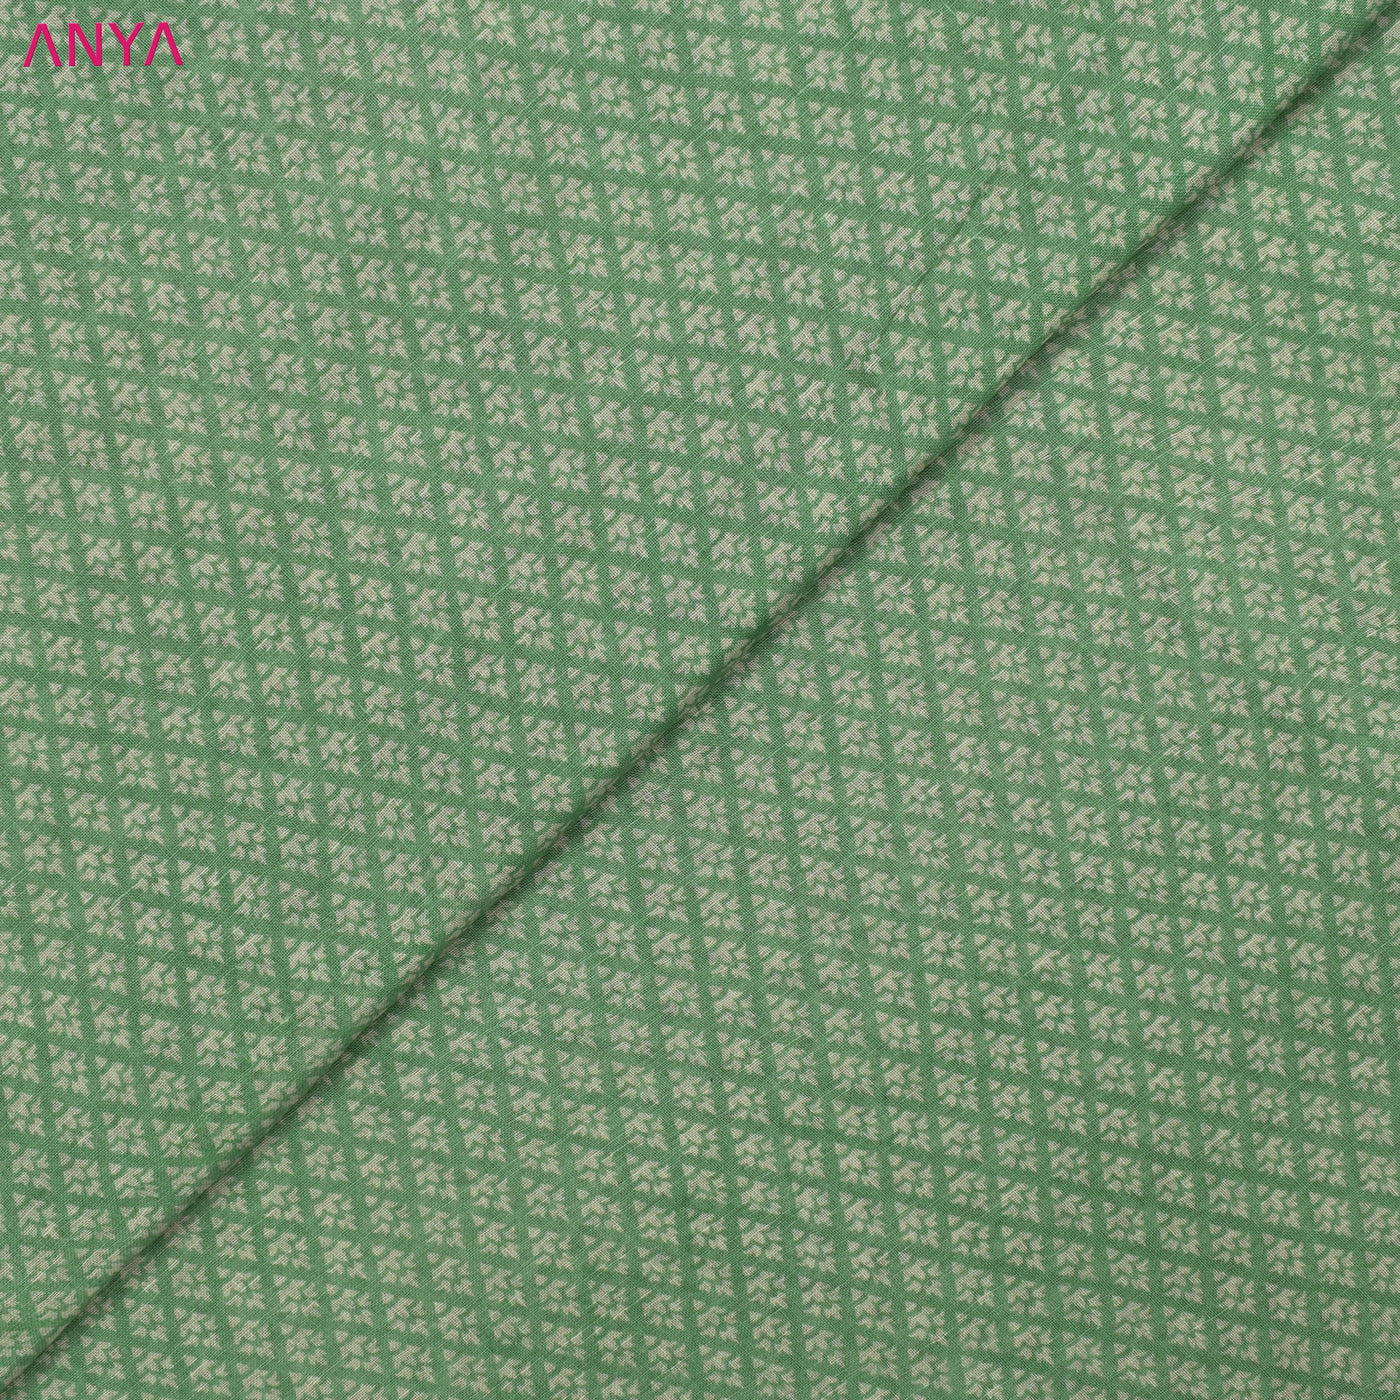 Green Linen Fabric with Small Printed Design